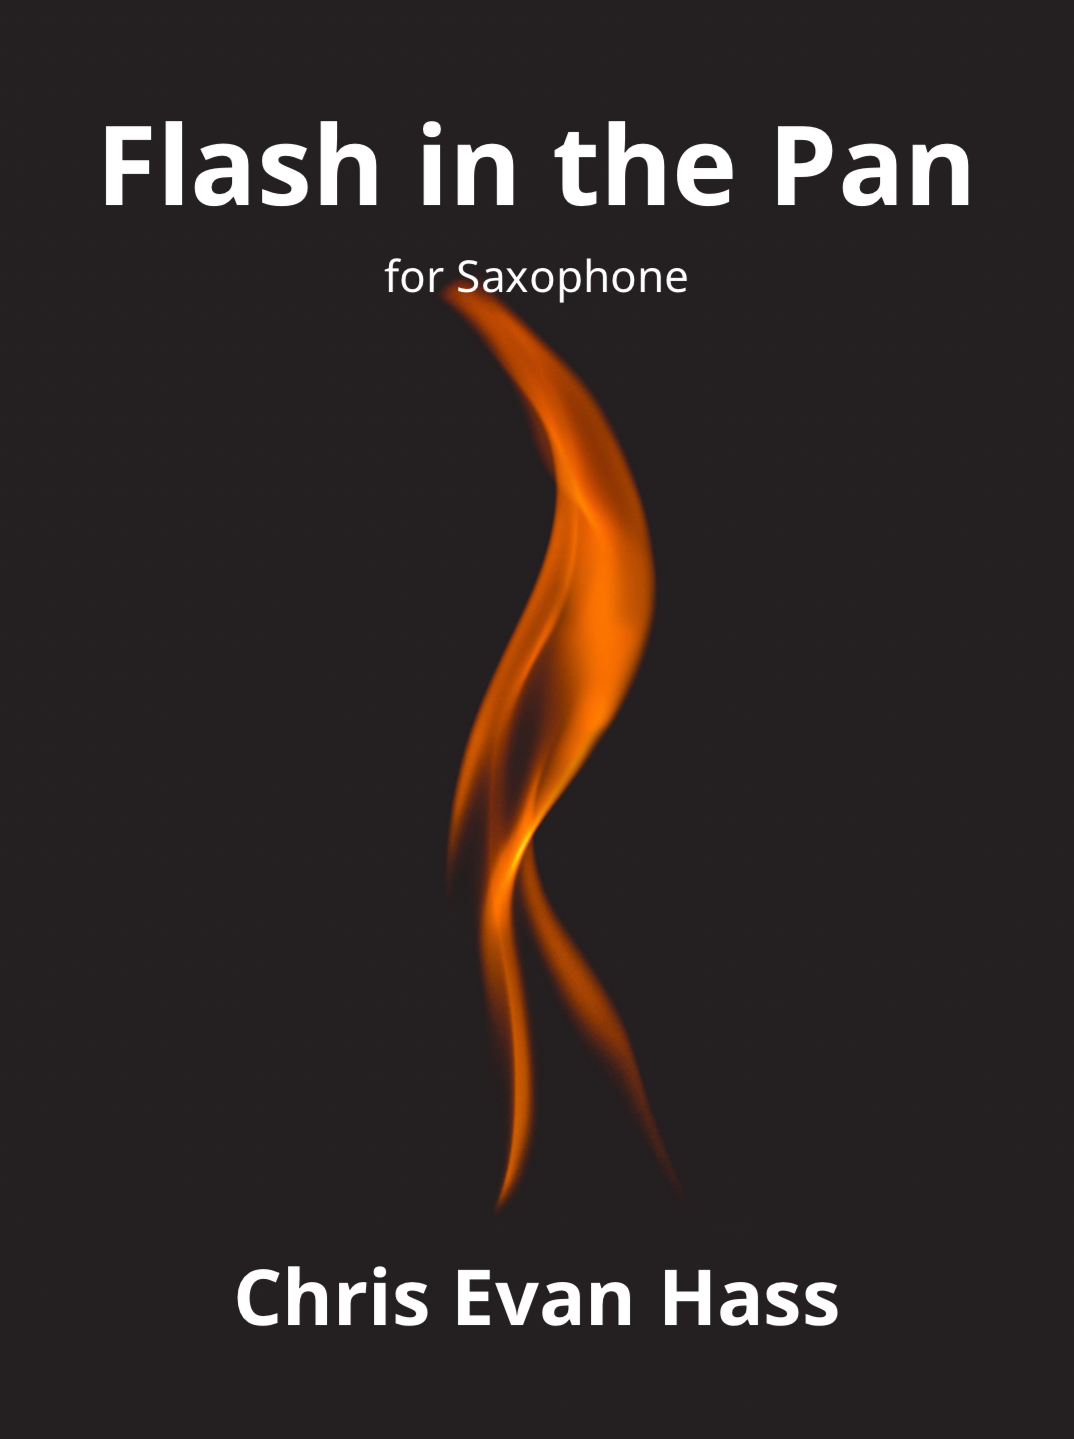 Flash In The Pan by Chris Evan Hass